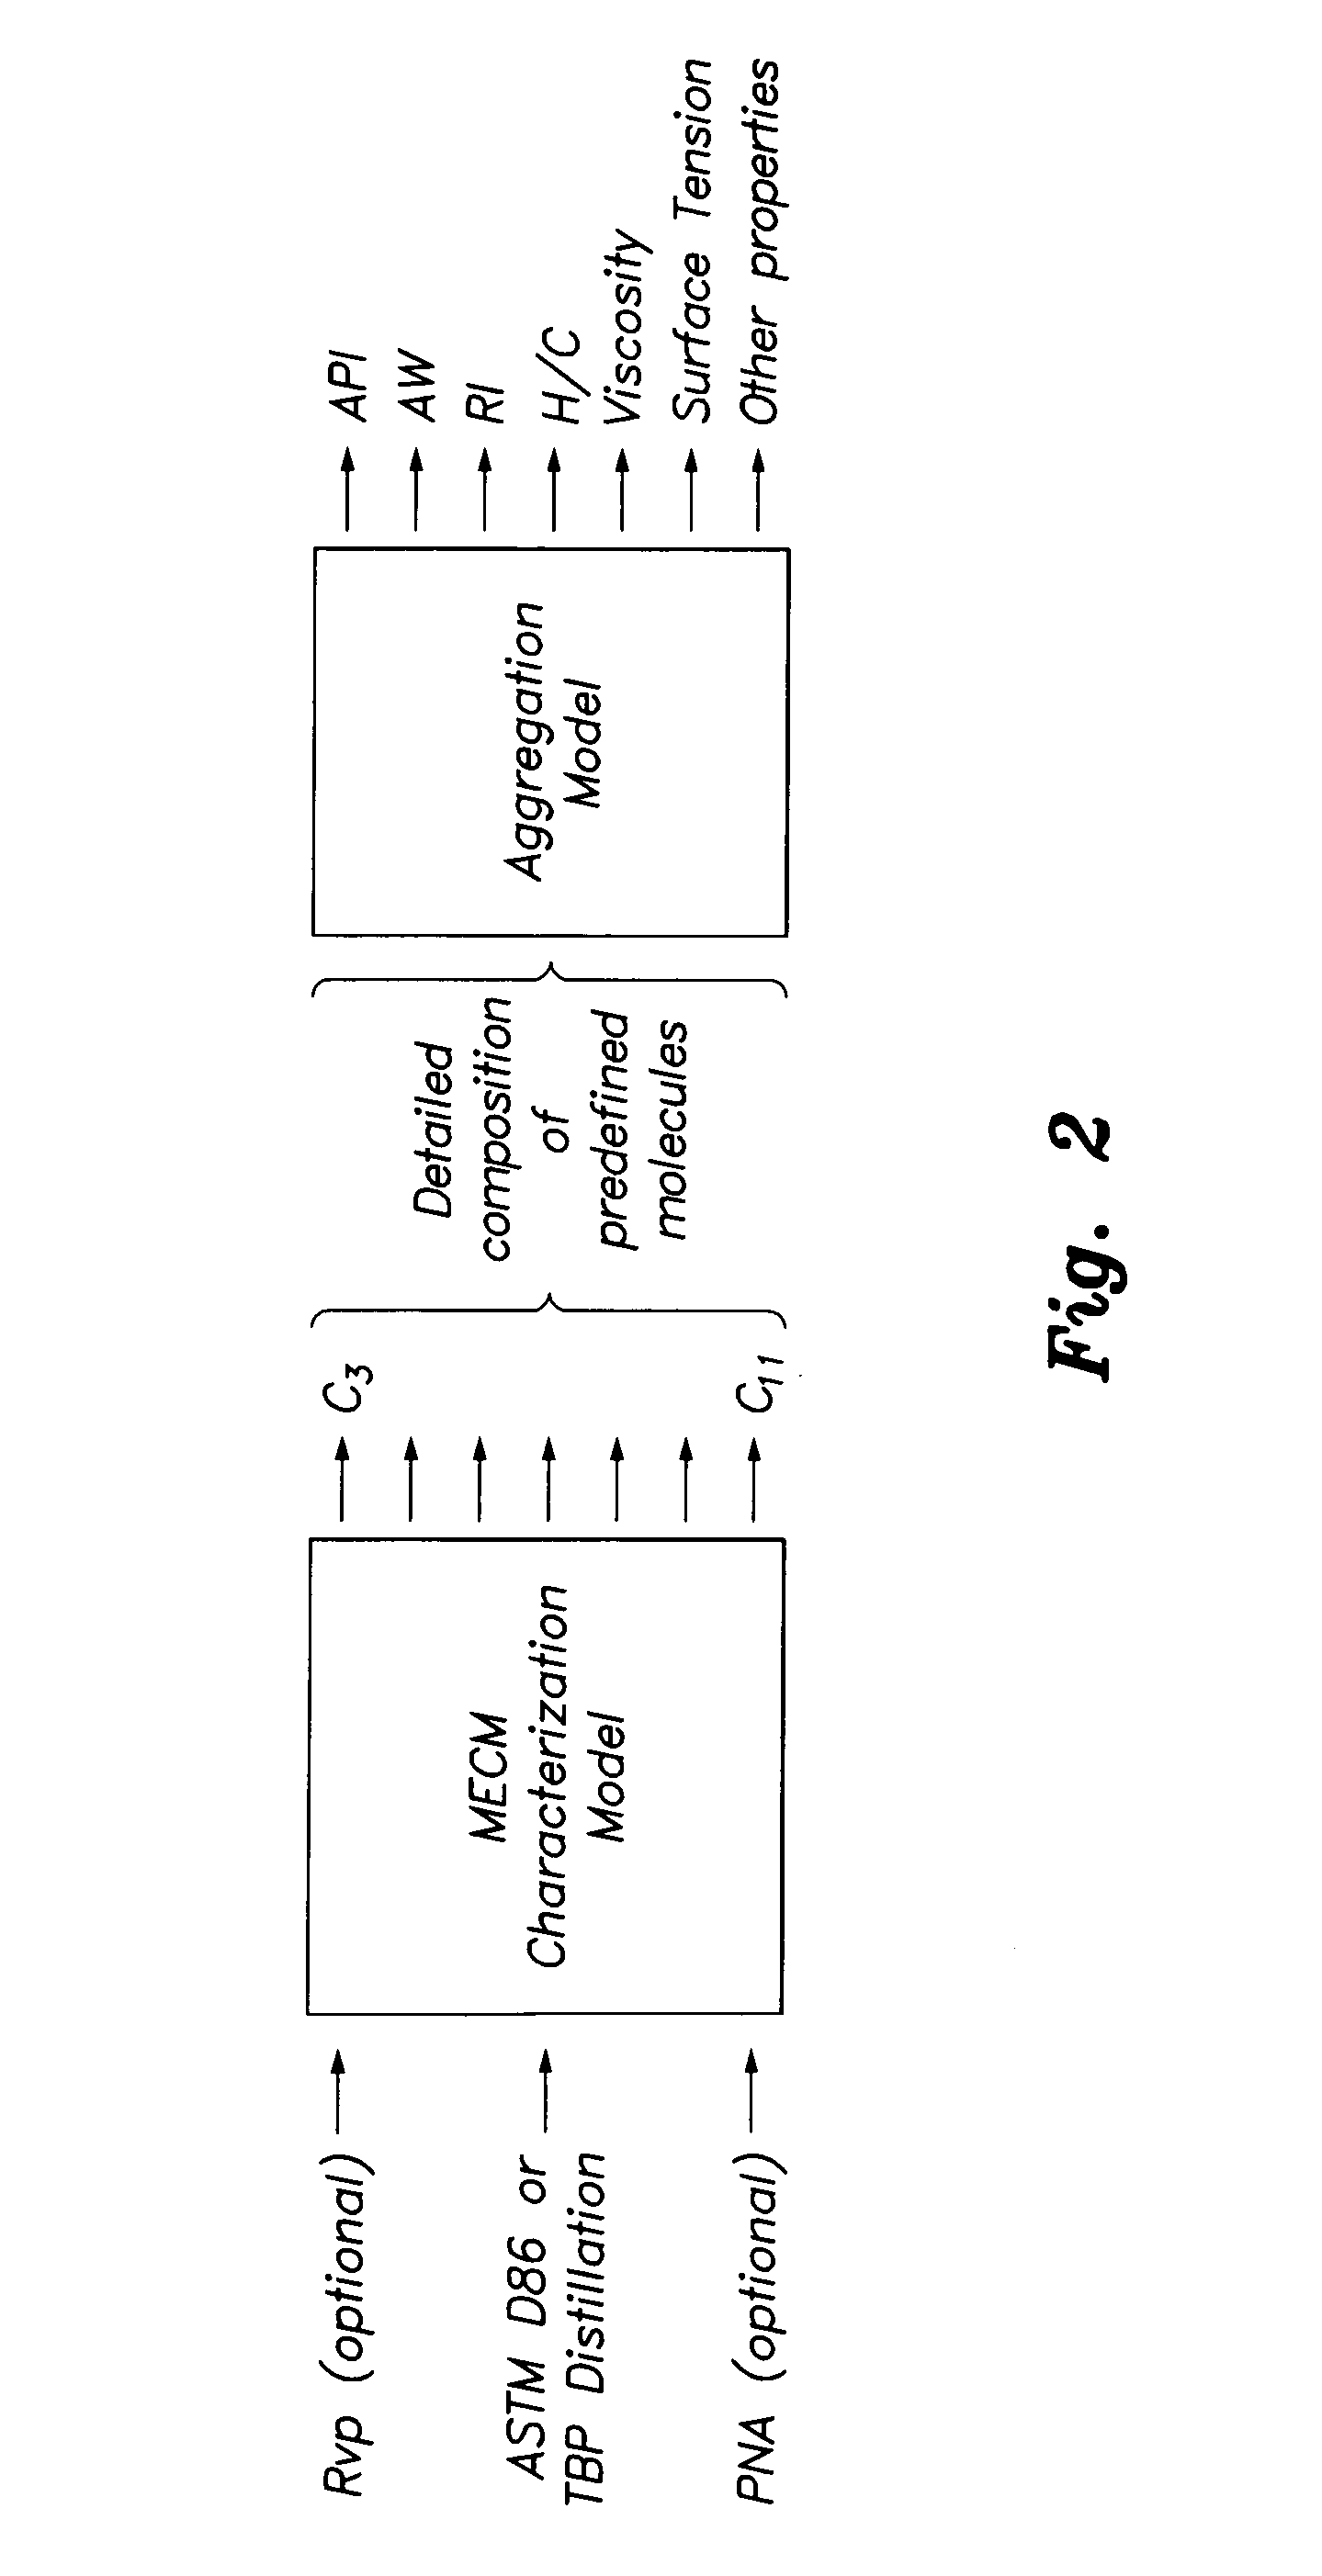 Method for measuring the properties of petroleum fuels by distillation